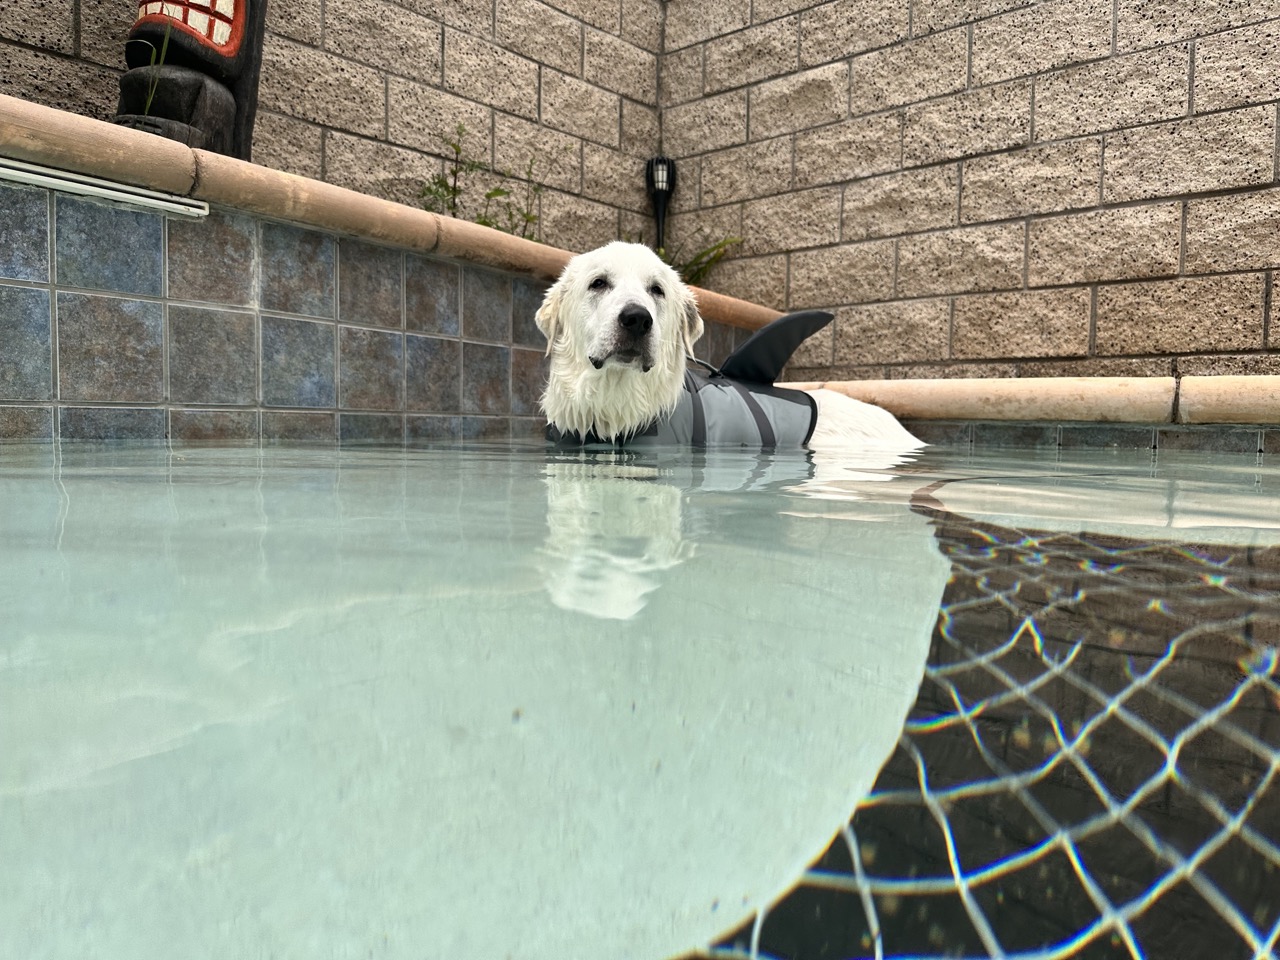 Tyson in the pool